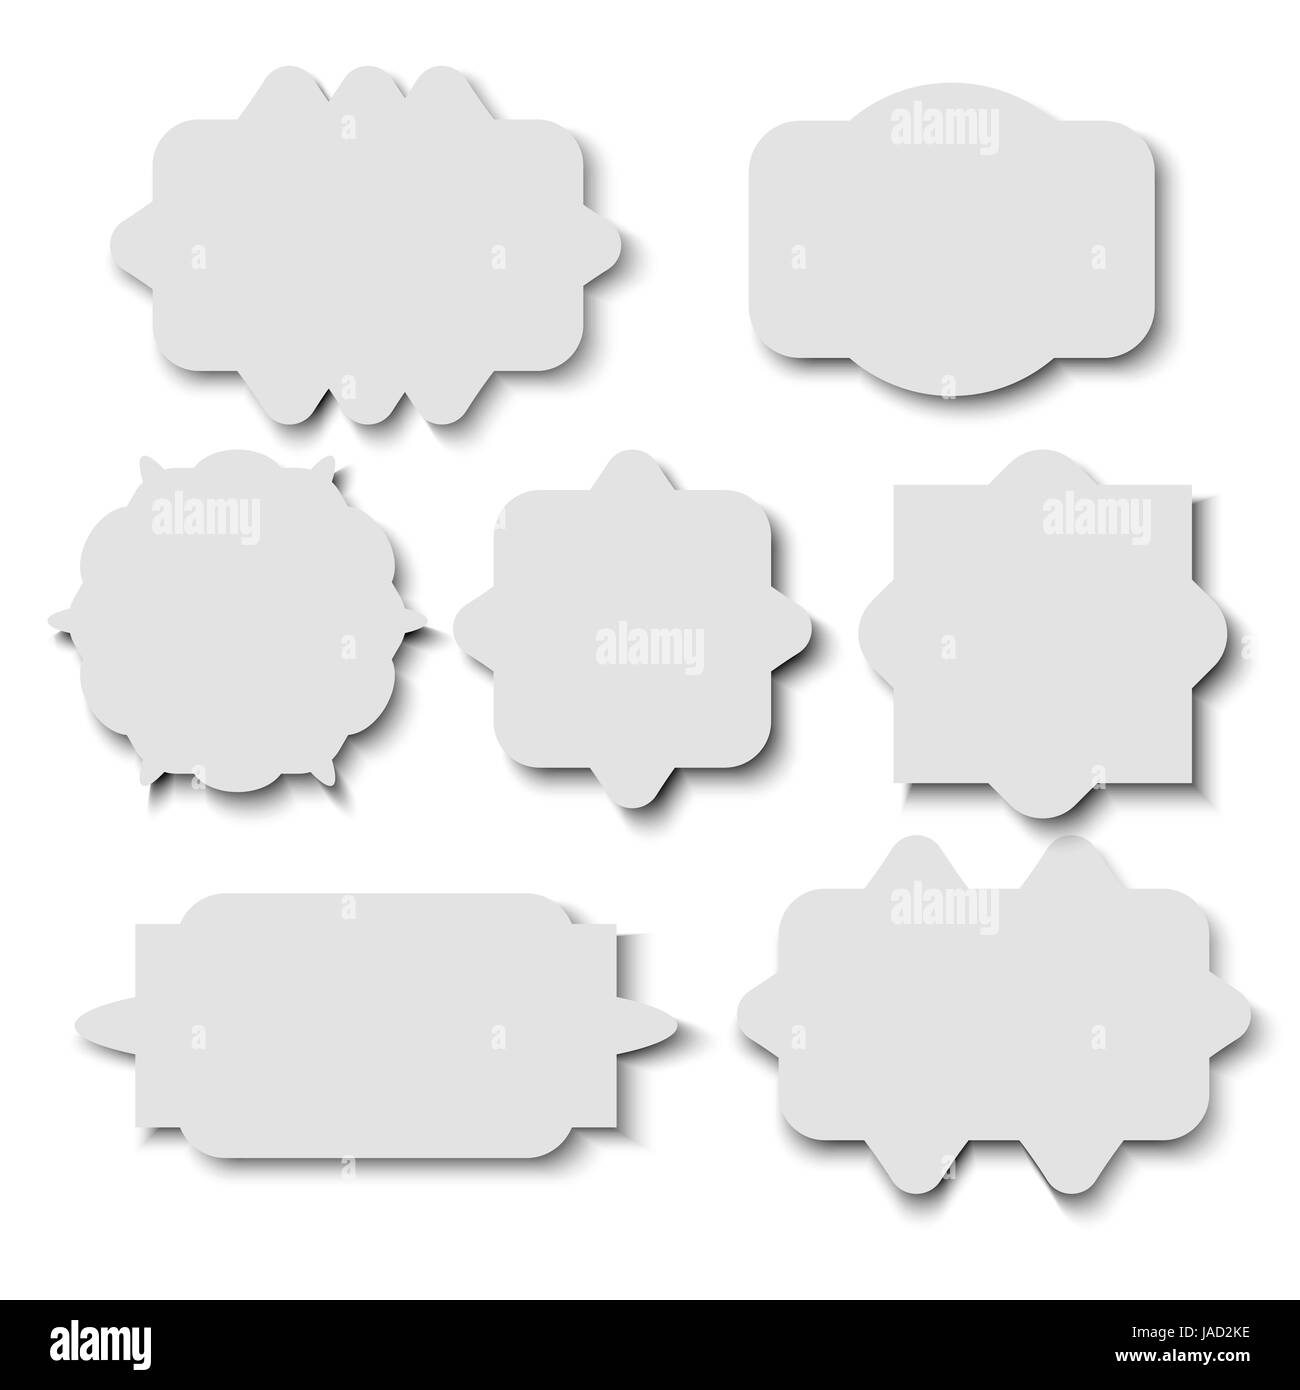 Blank sticker template over white background Stock Vector